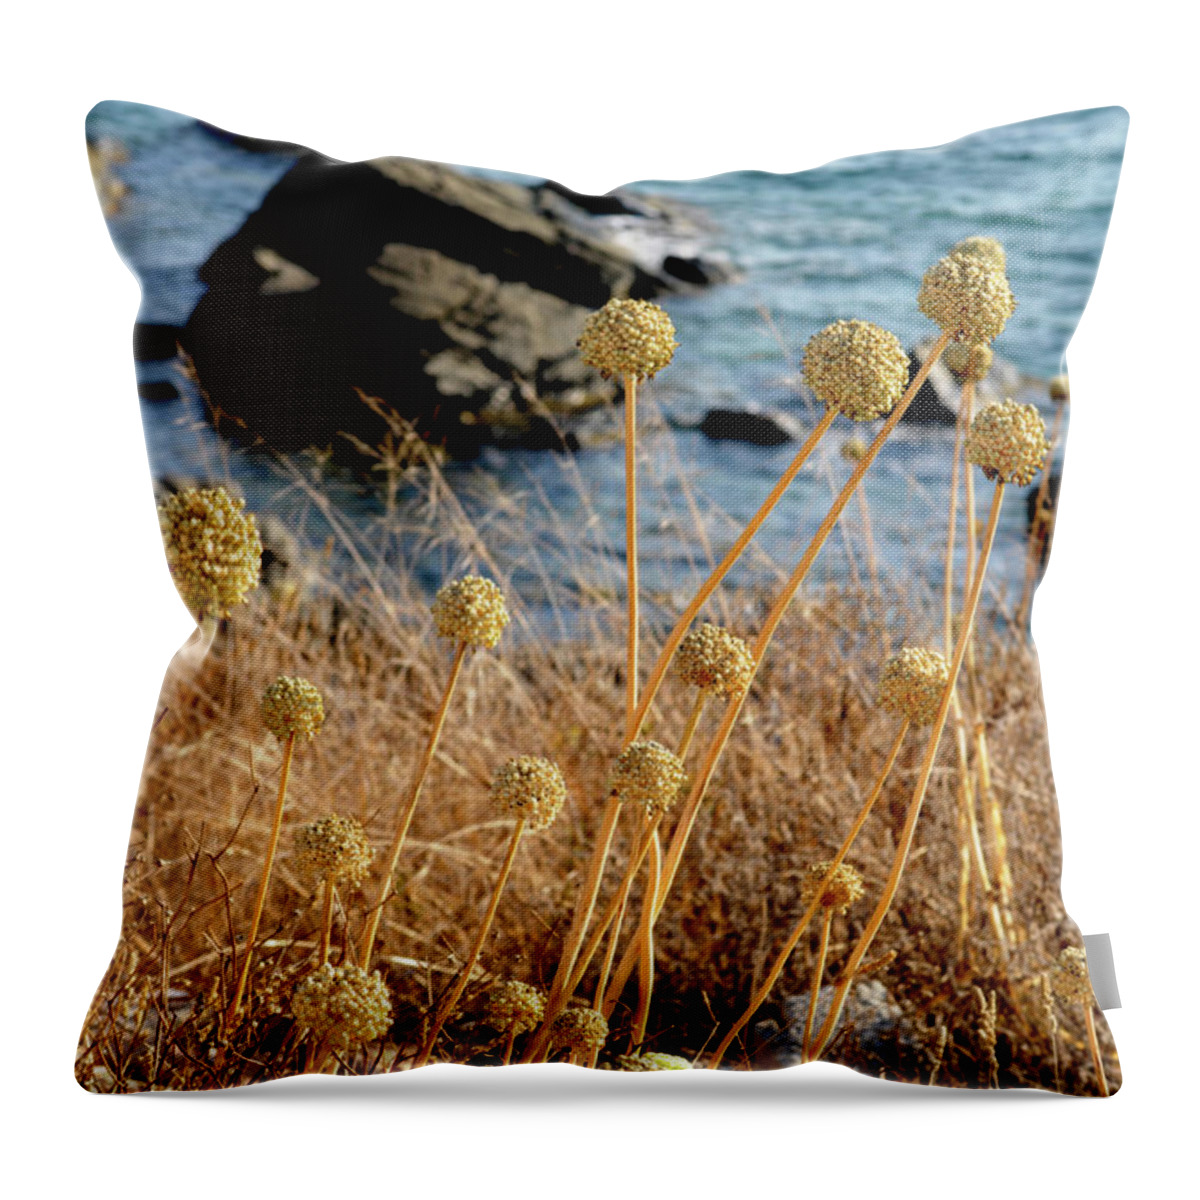 Blue Throw Pillow featuring the photograph Watching The Sea 2 by Pedro Cardona Llambias